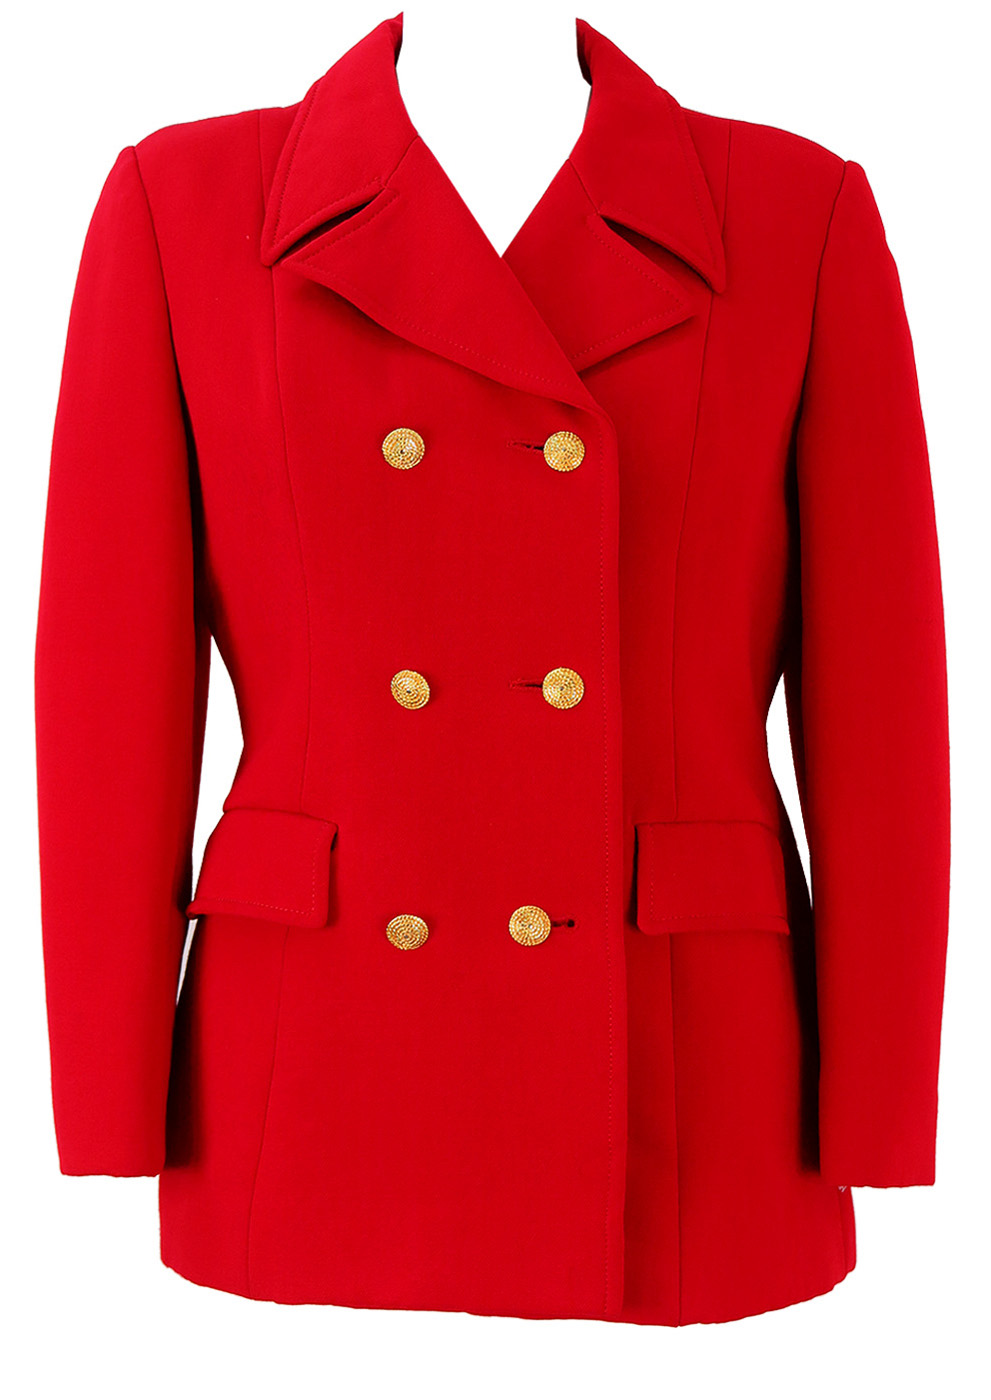 Vintage 1960's Red Double Breasted Jacket with Gold Buttons - M | Reign ...